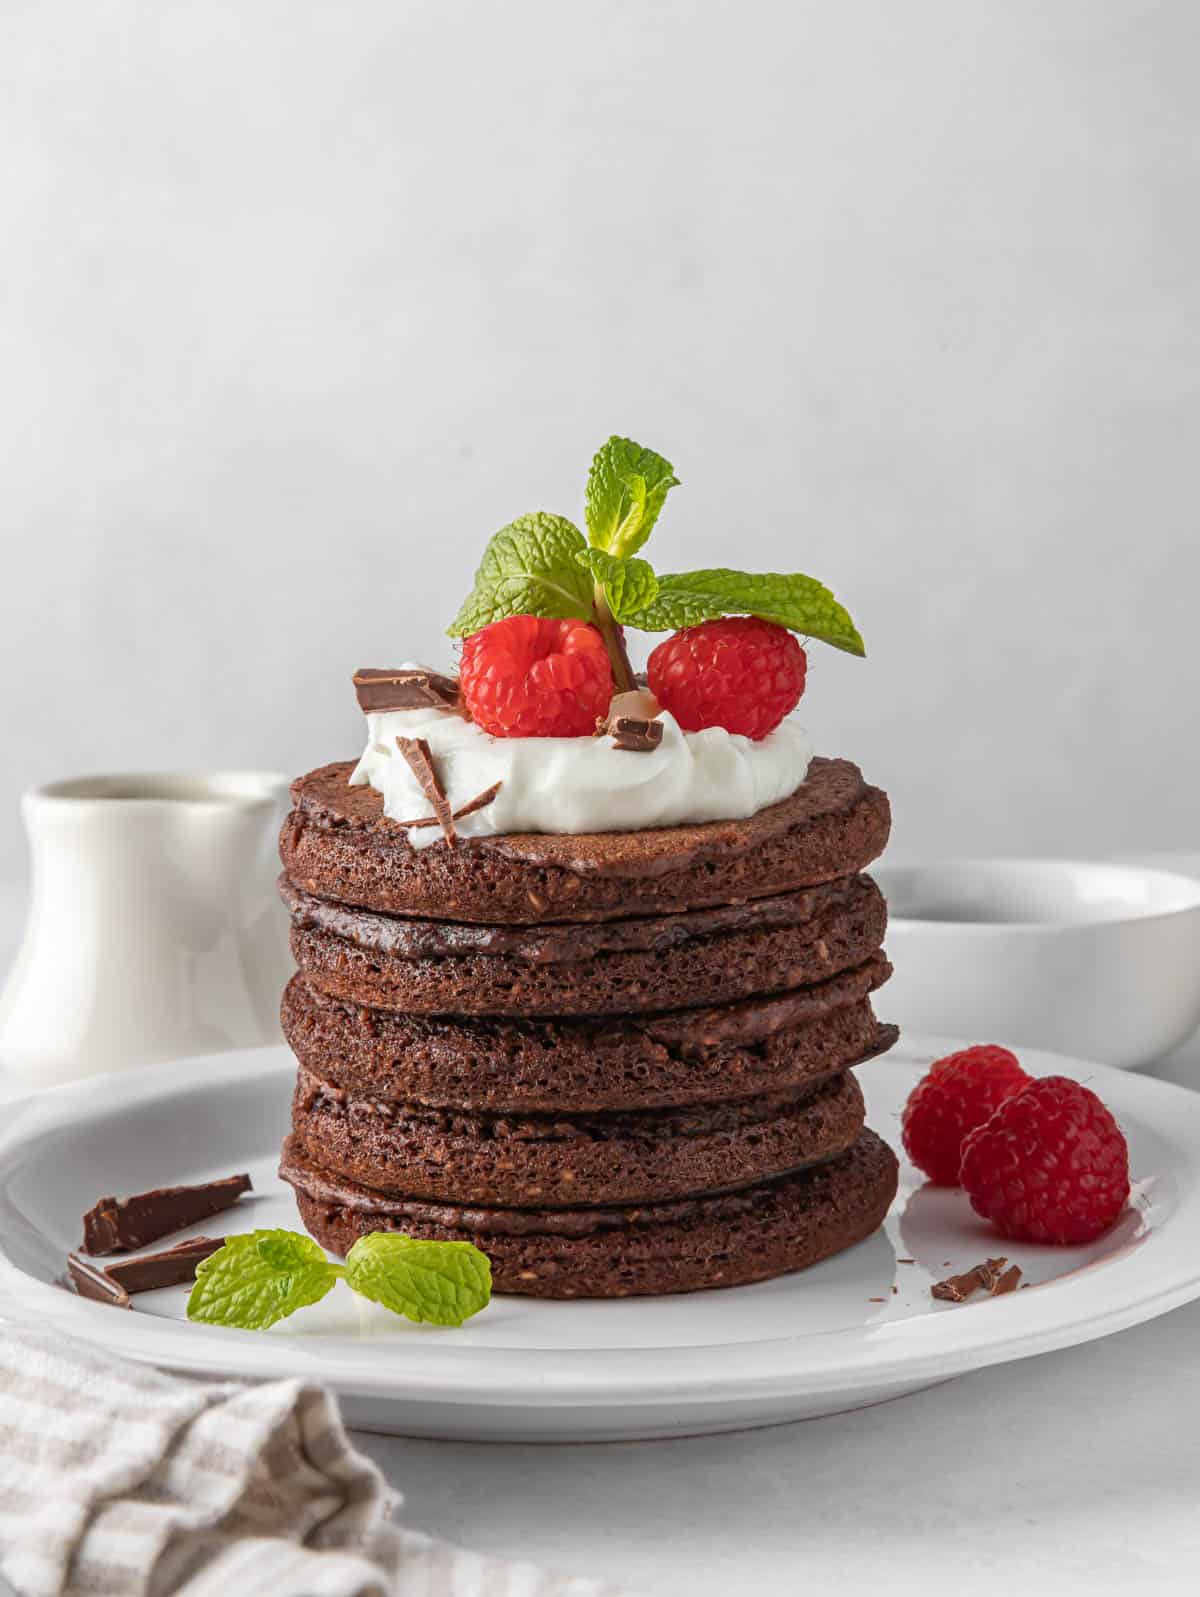 A stack of chocolate pancakes on a white plate.